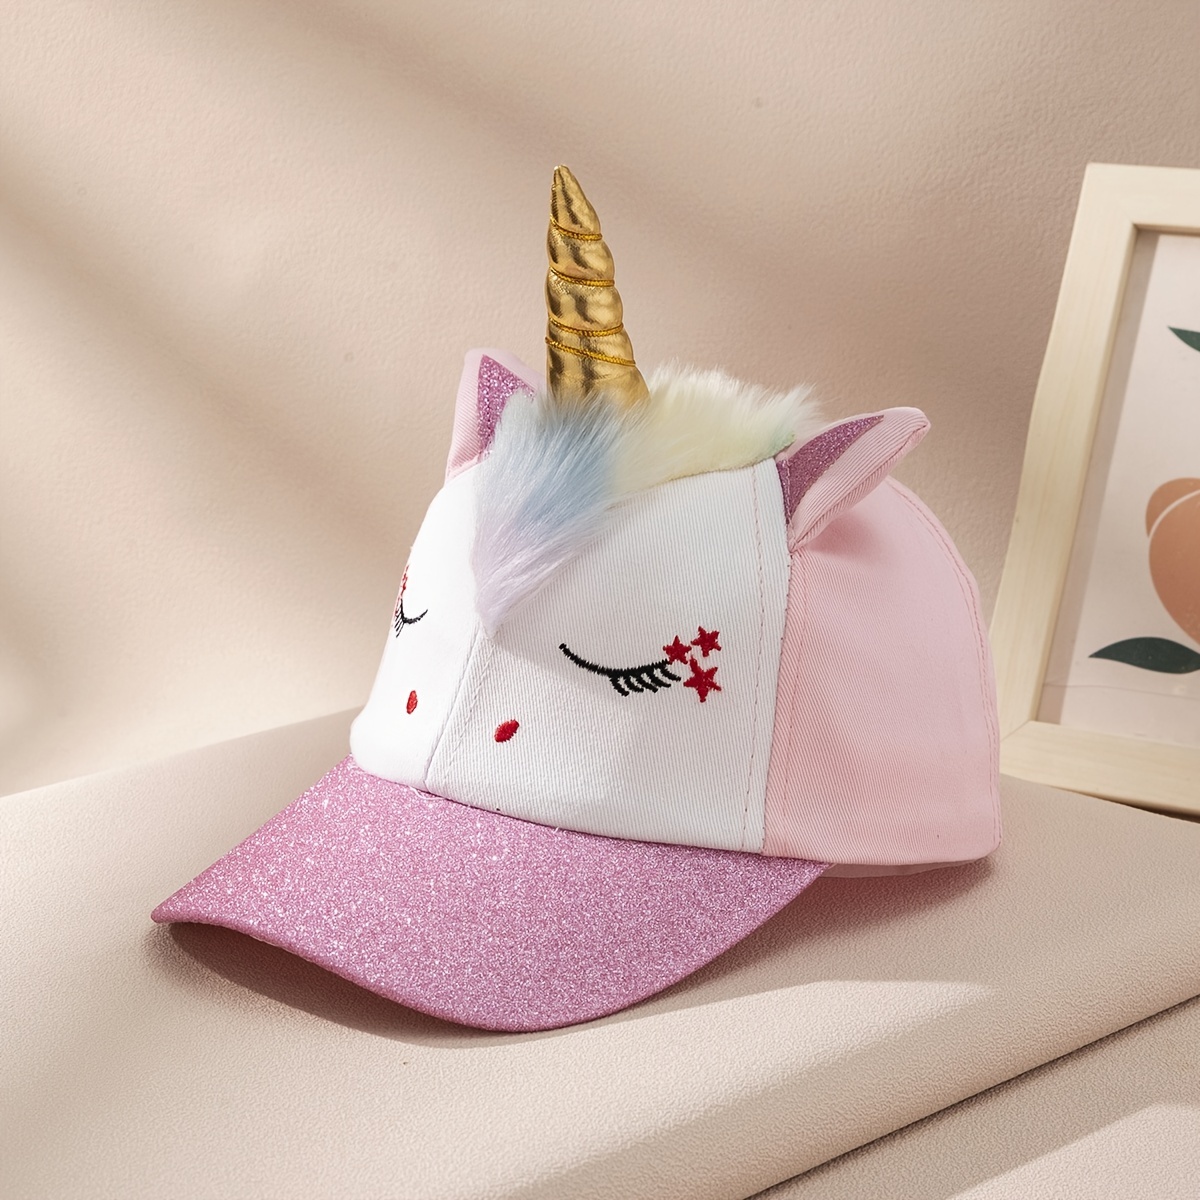 Coosilion Gifts for Girls 4 5 6 7 8 9 10 12 Years Old-Decorate Your Own  Baseball Cap with Unicorns Stickers, Arts & Crafts for Girls Ages 6-8 8-12